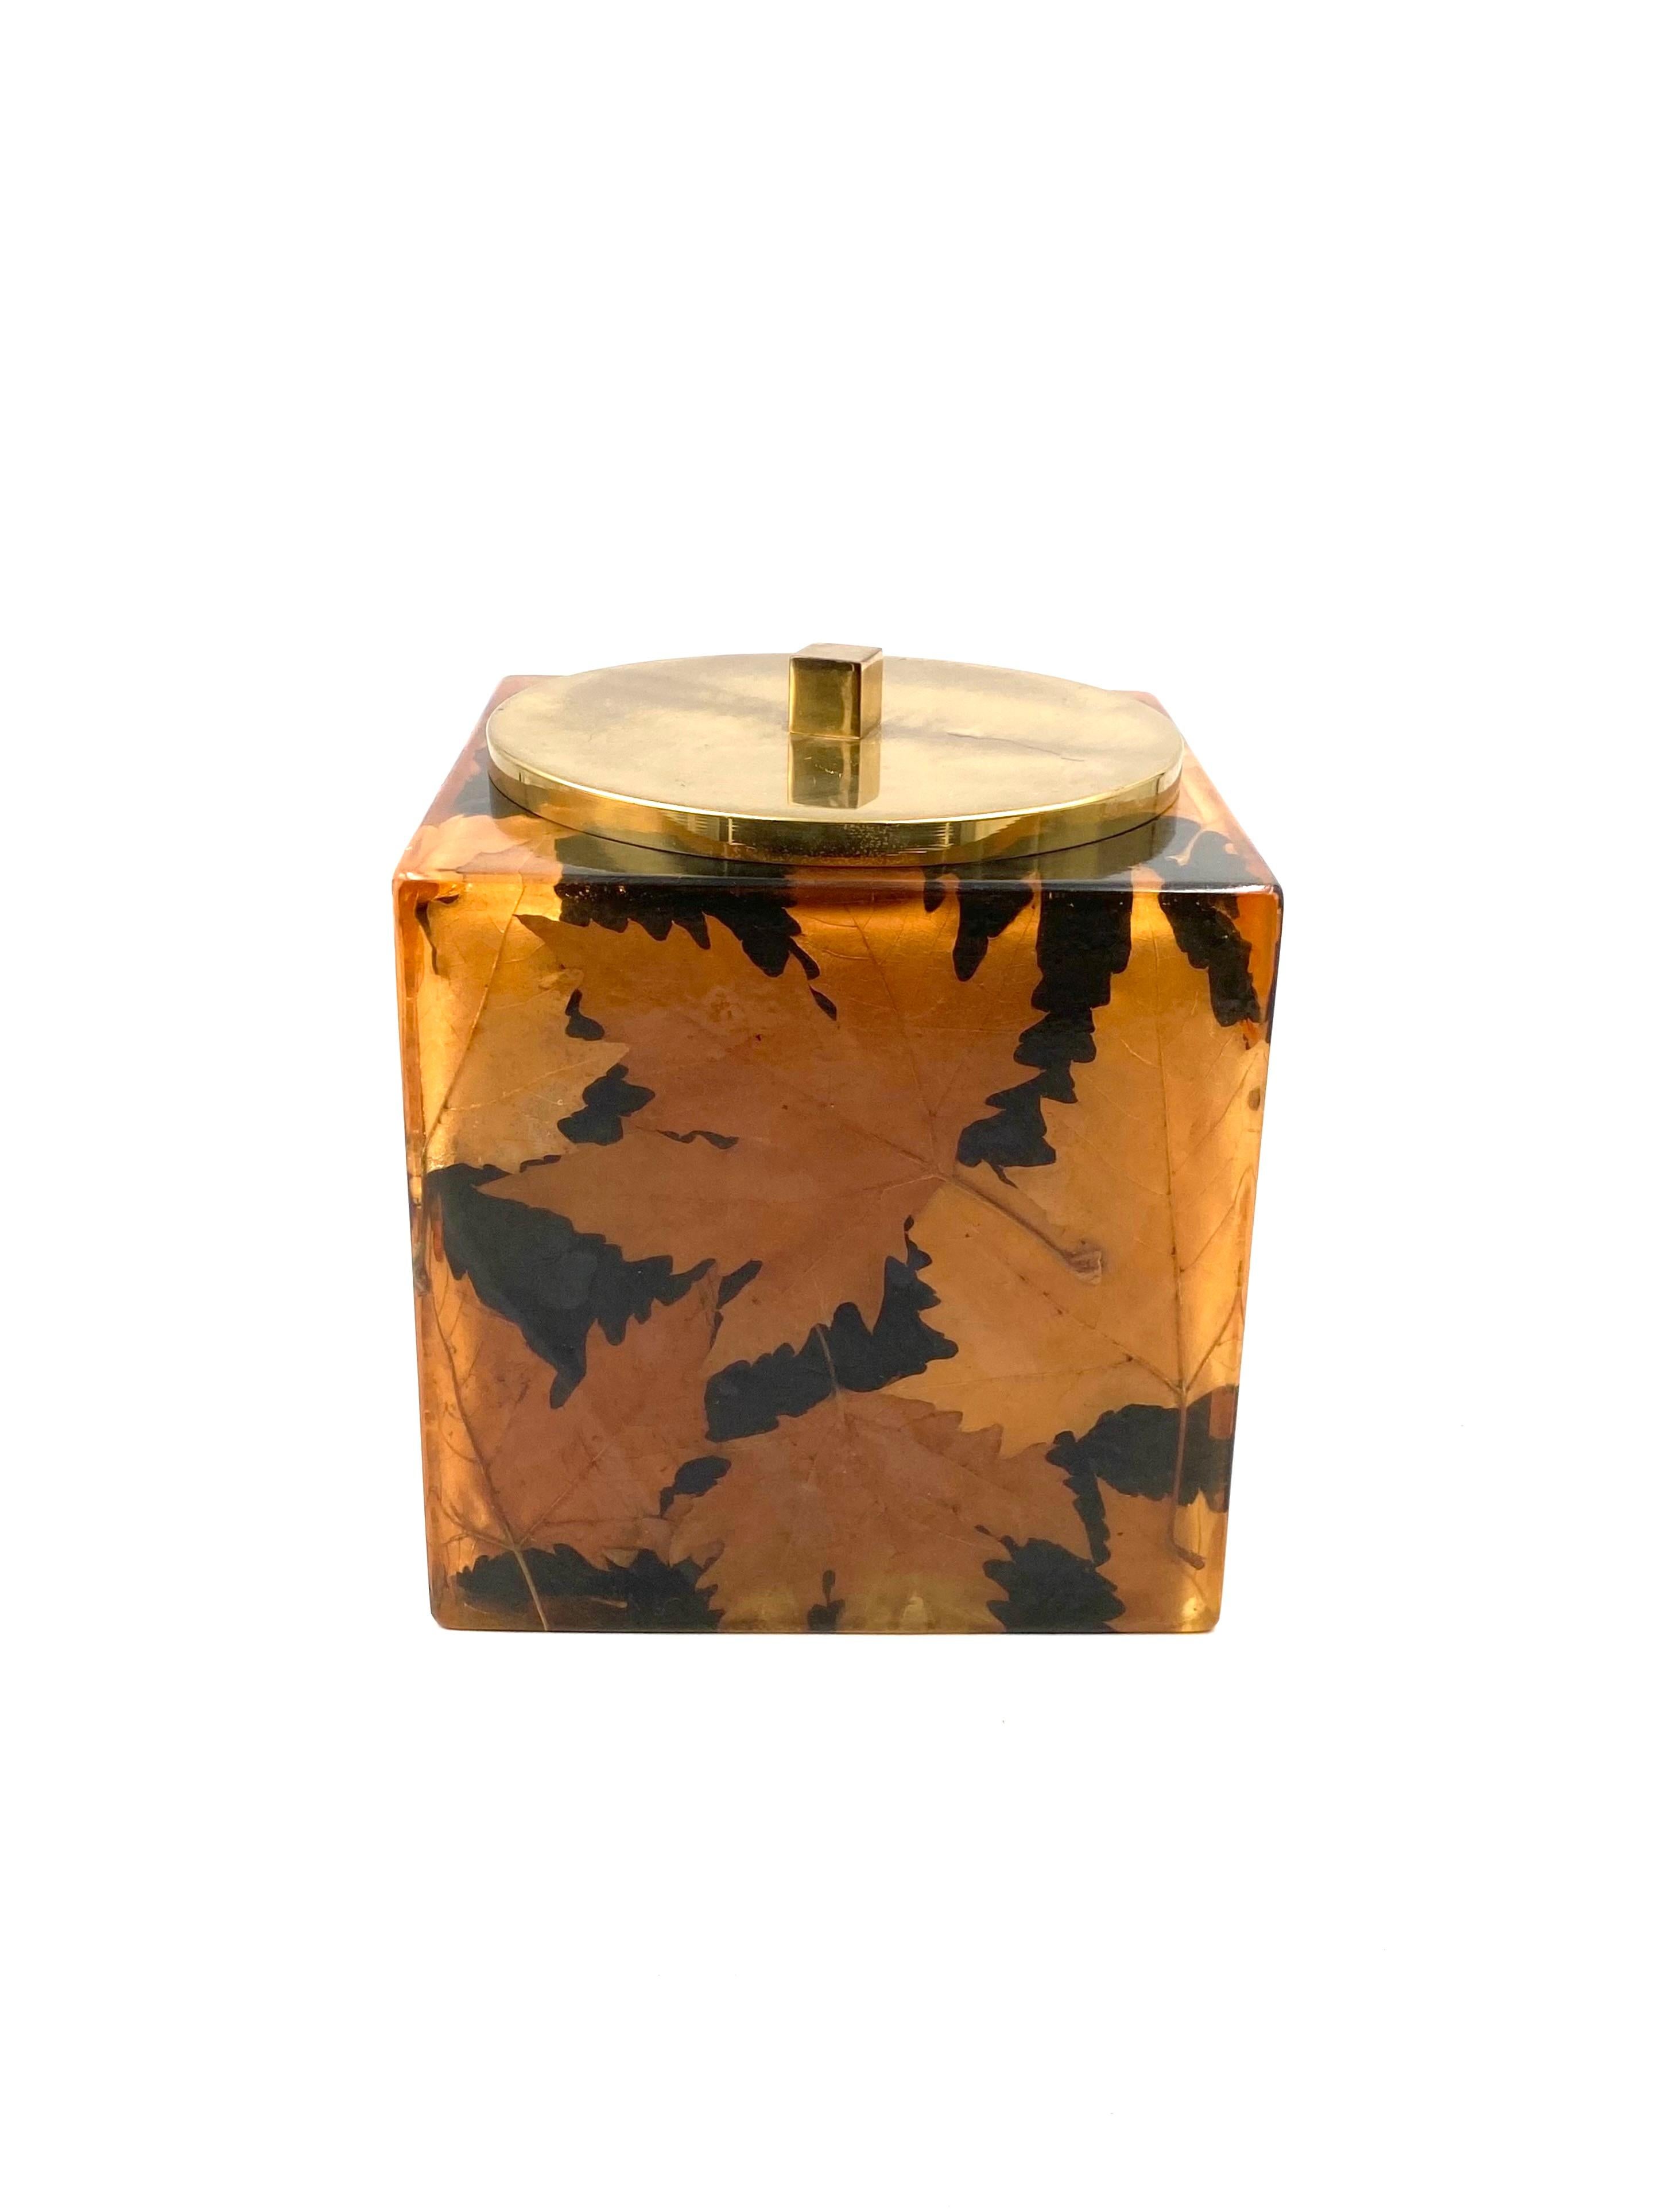 Hollywood regency brass and leaves resin ice bucket, Montagnani Florence 1970s For Sale 7